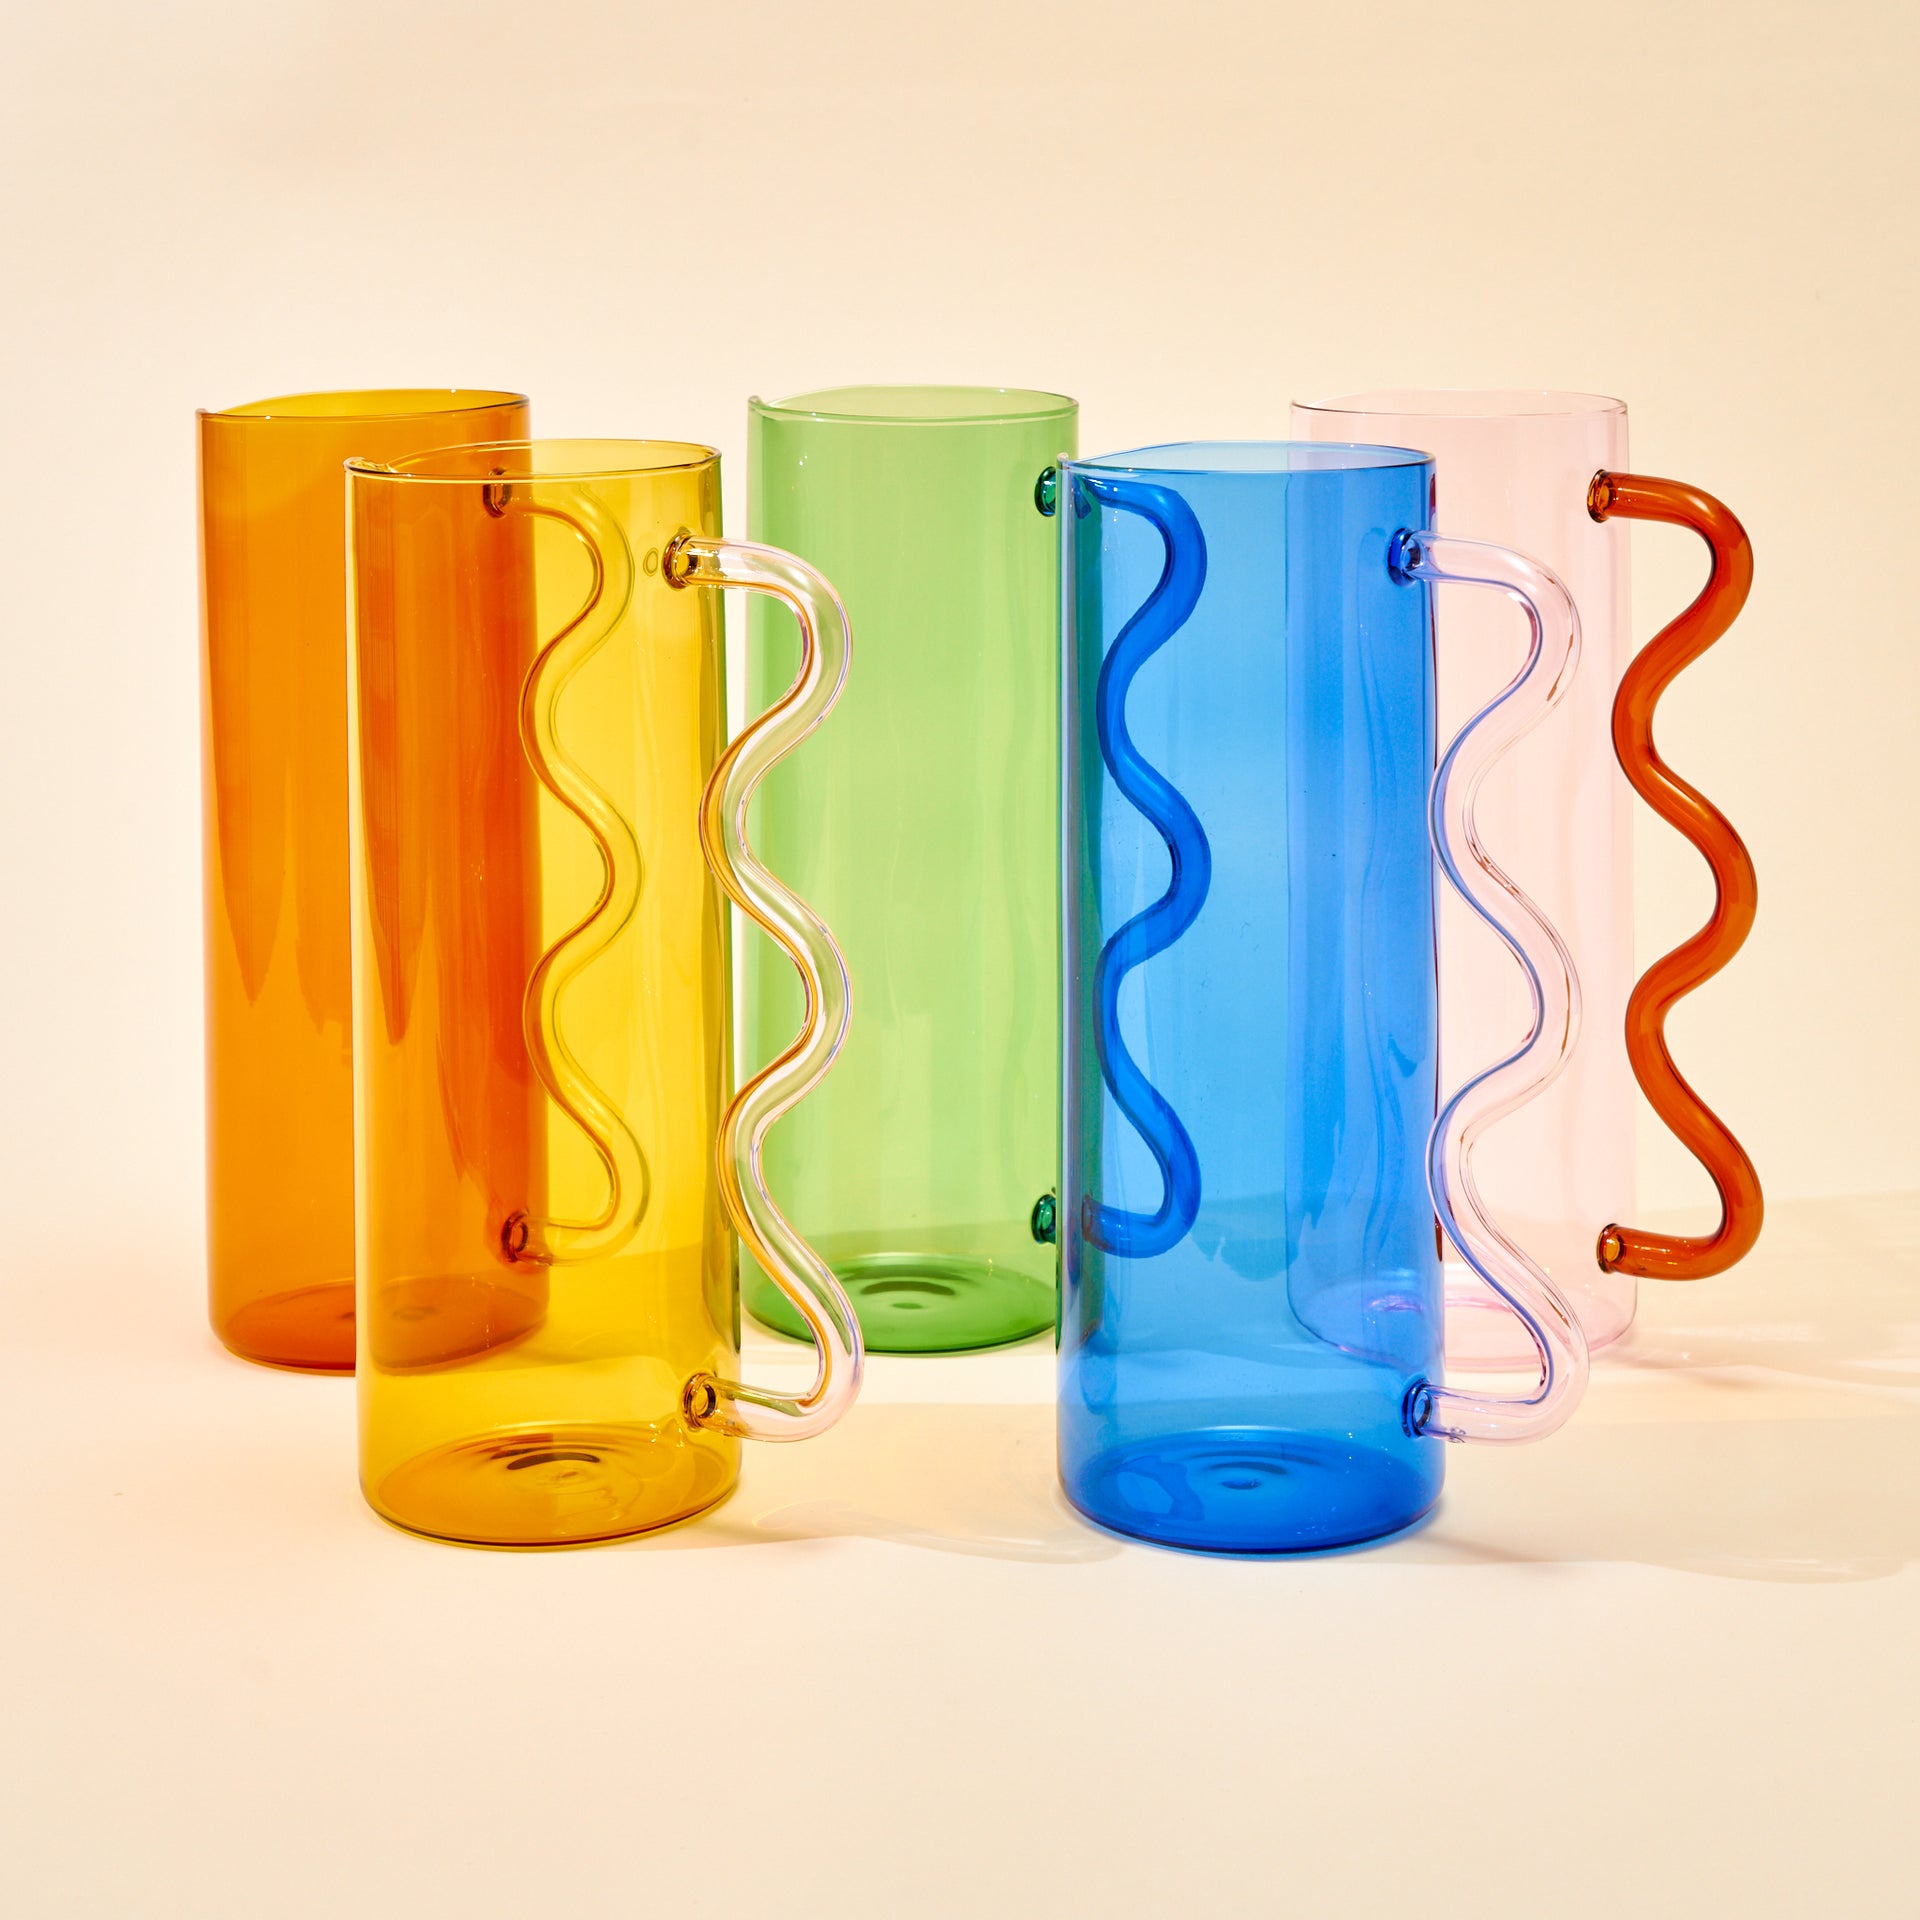 Wave Pitcher - Yellow/Pink